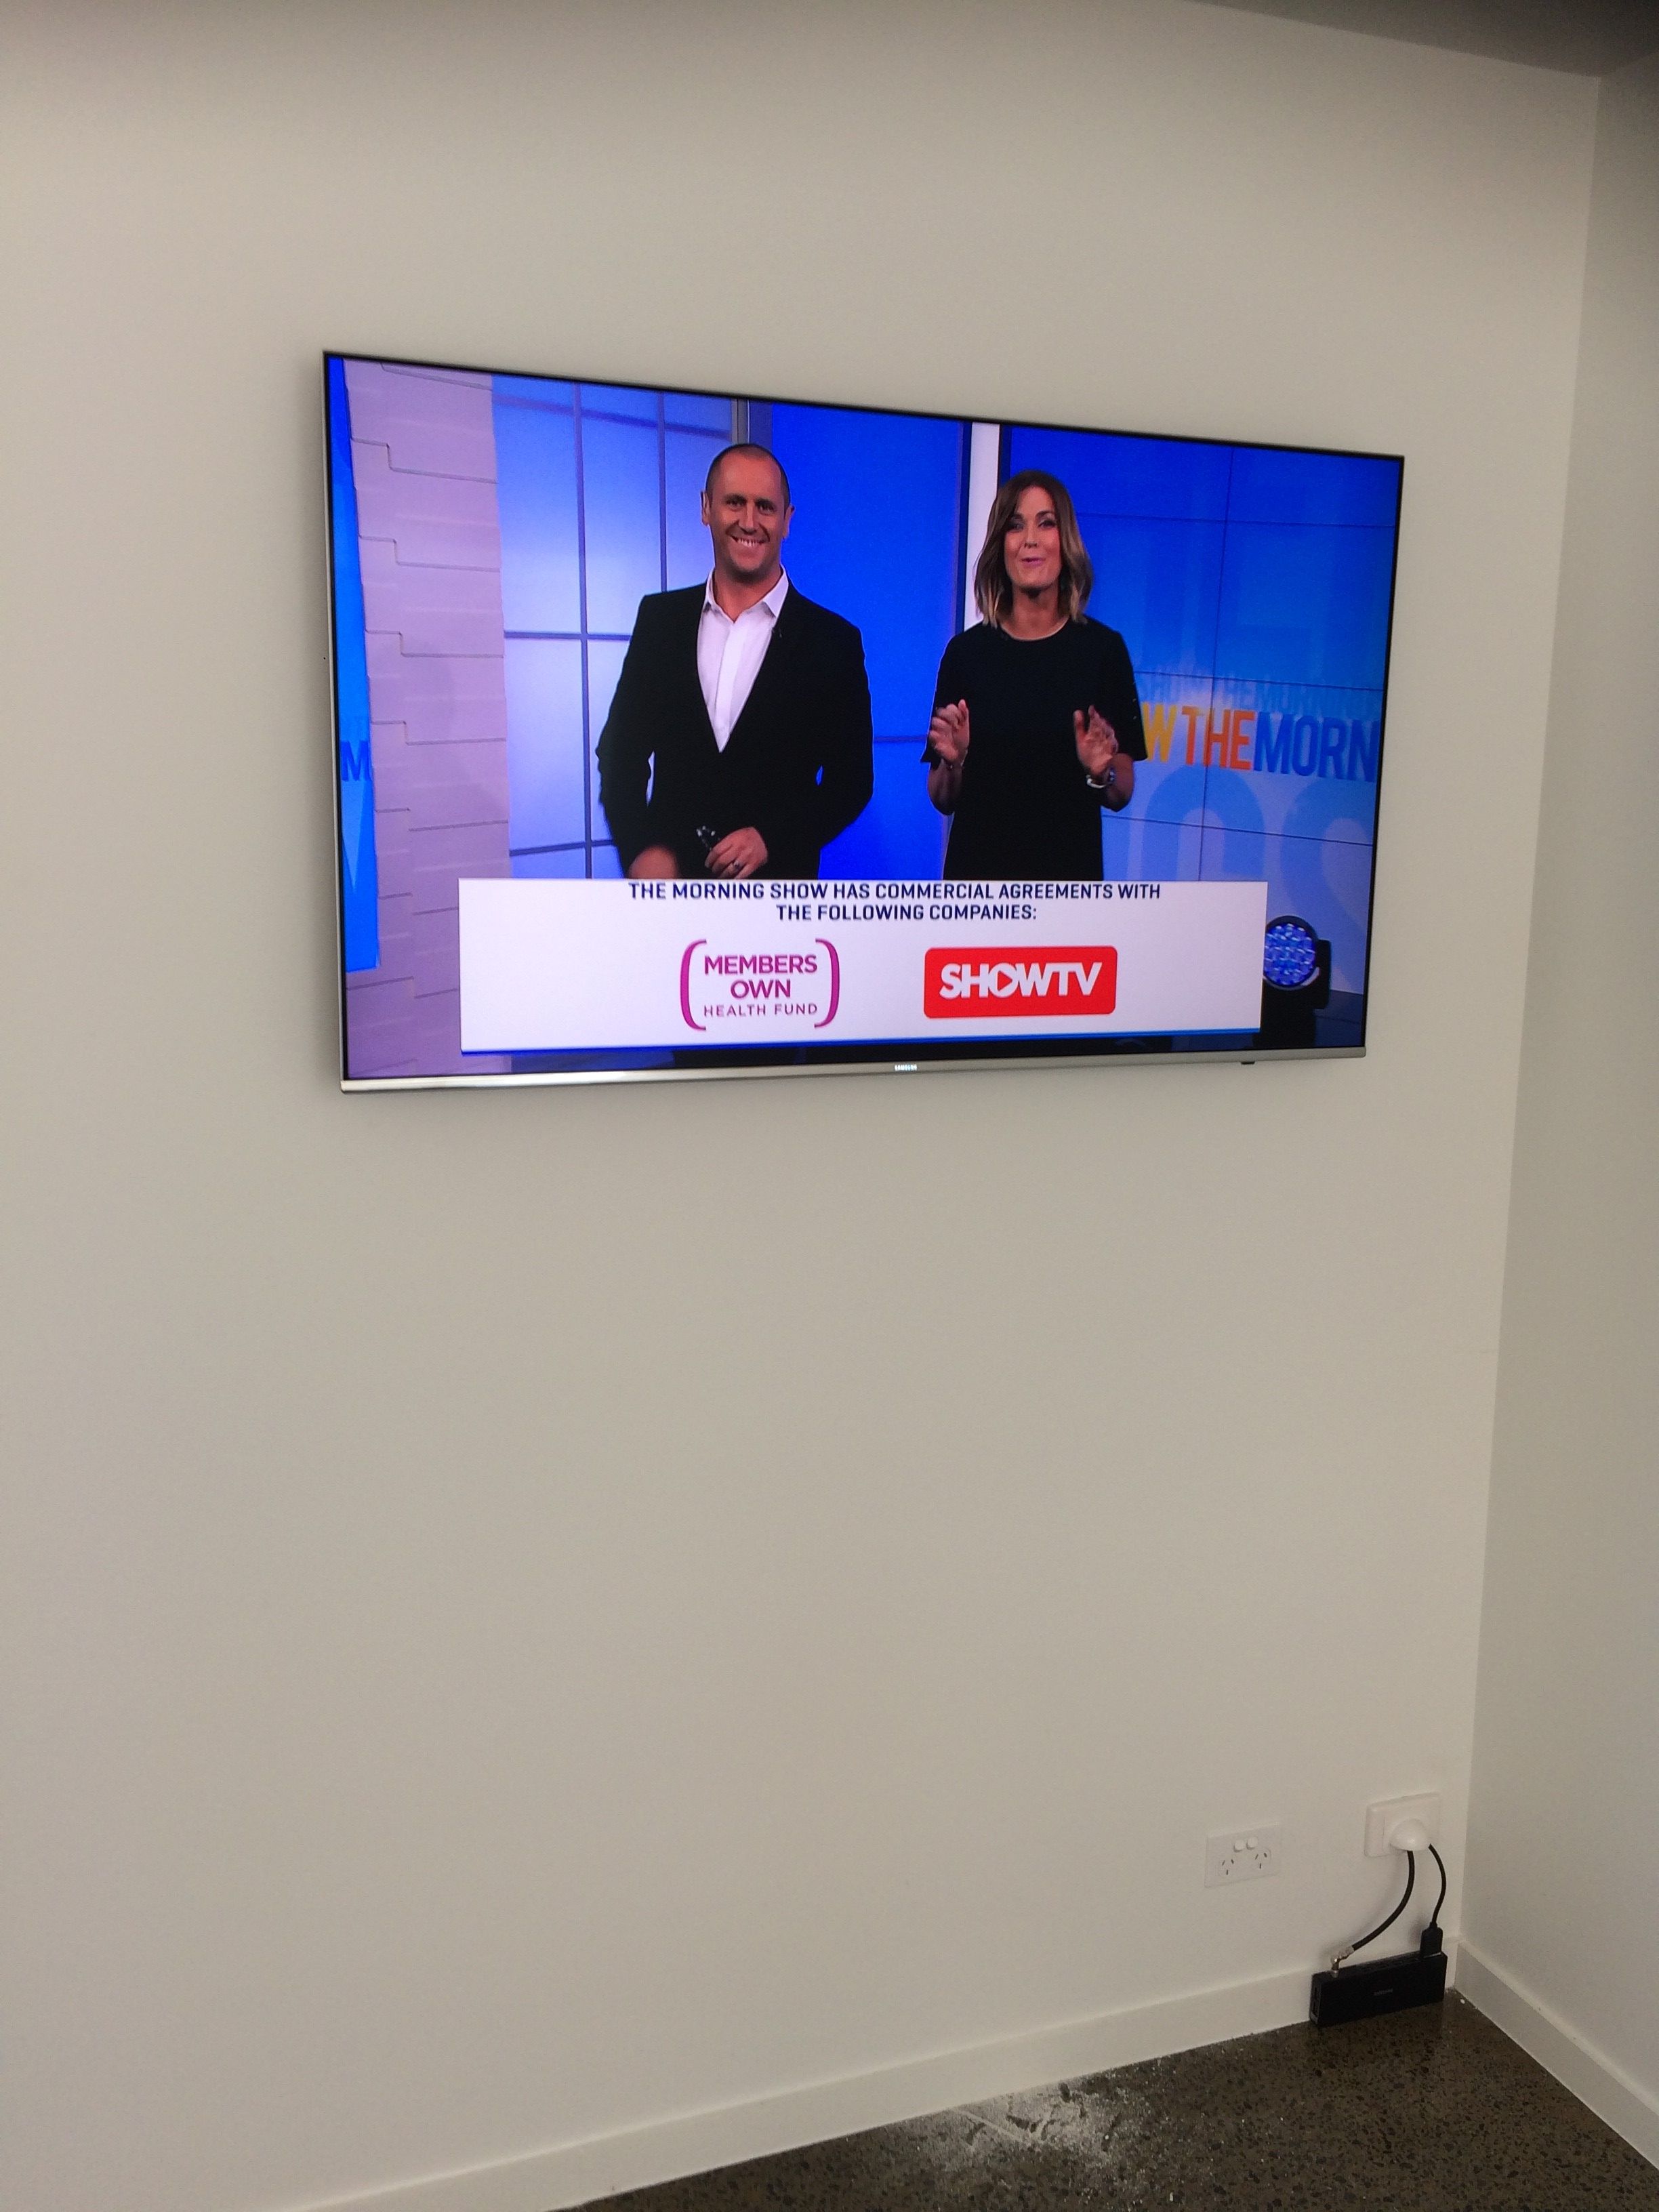 Wall Mounted TVs: How to hide cables behind plasterboard walls